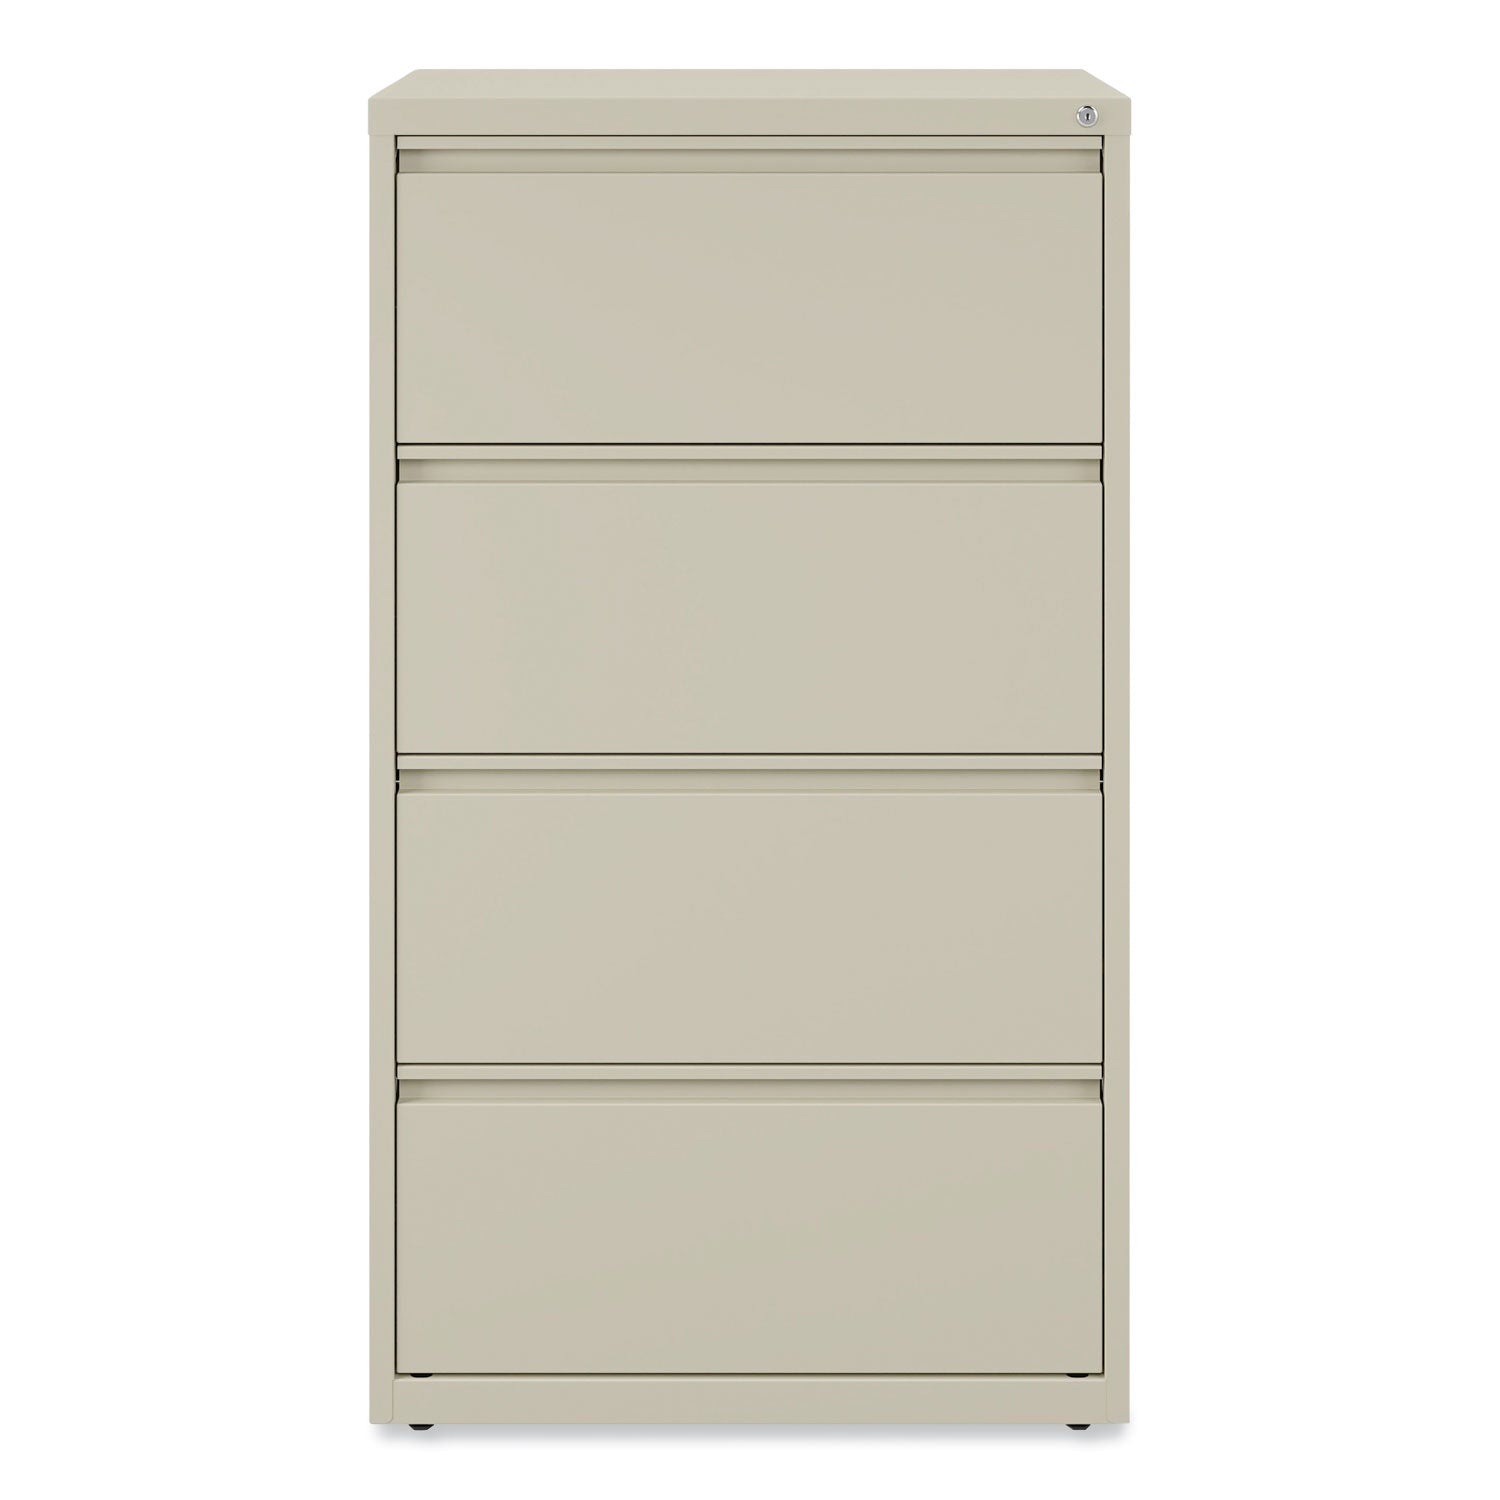 lateral-file-4-legal-letter-size-file-drawers-putty-30-x-1863-x-525_alehlf3054py - 1